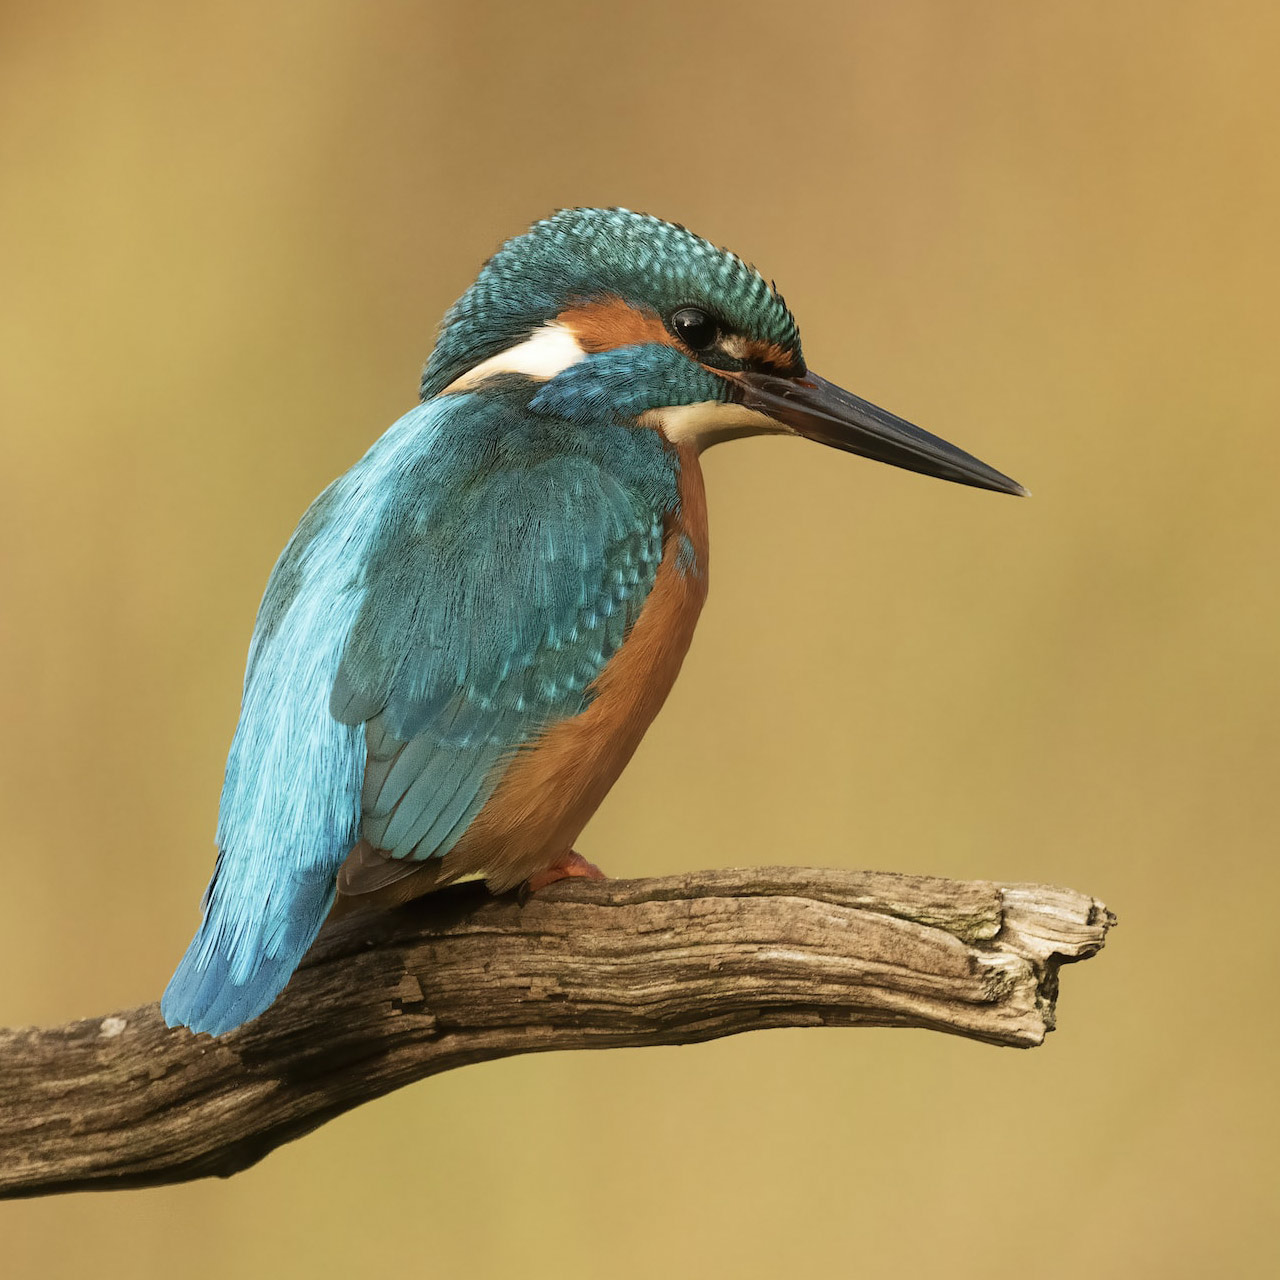 Kingfisher bird resting on a branch